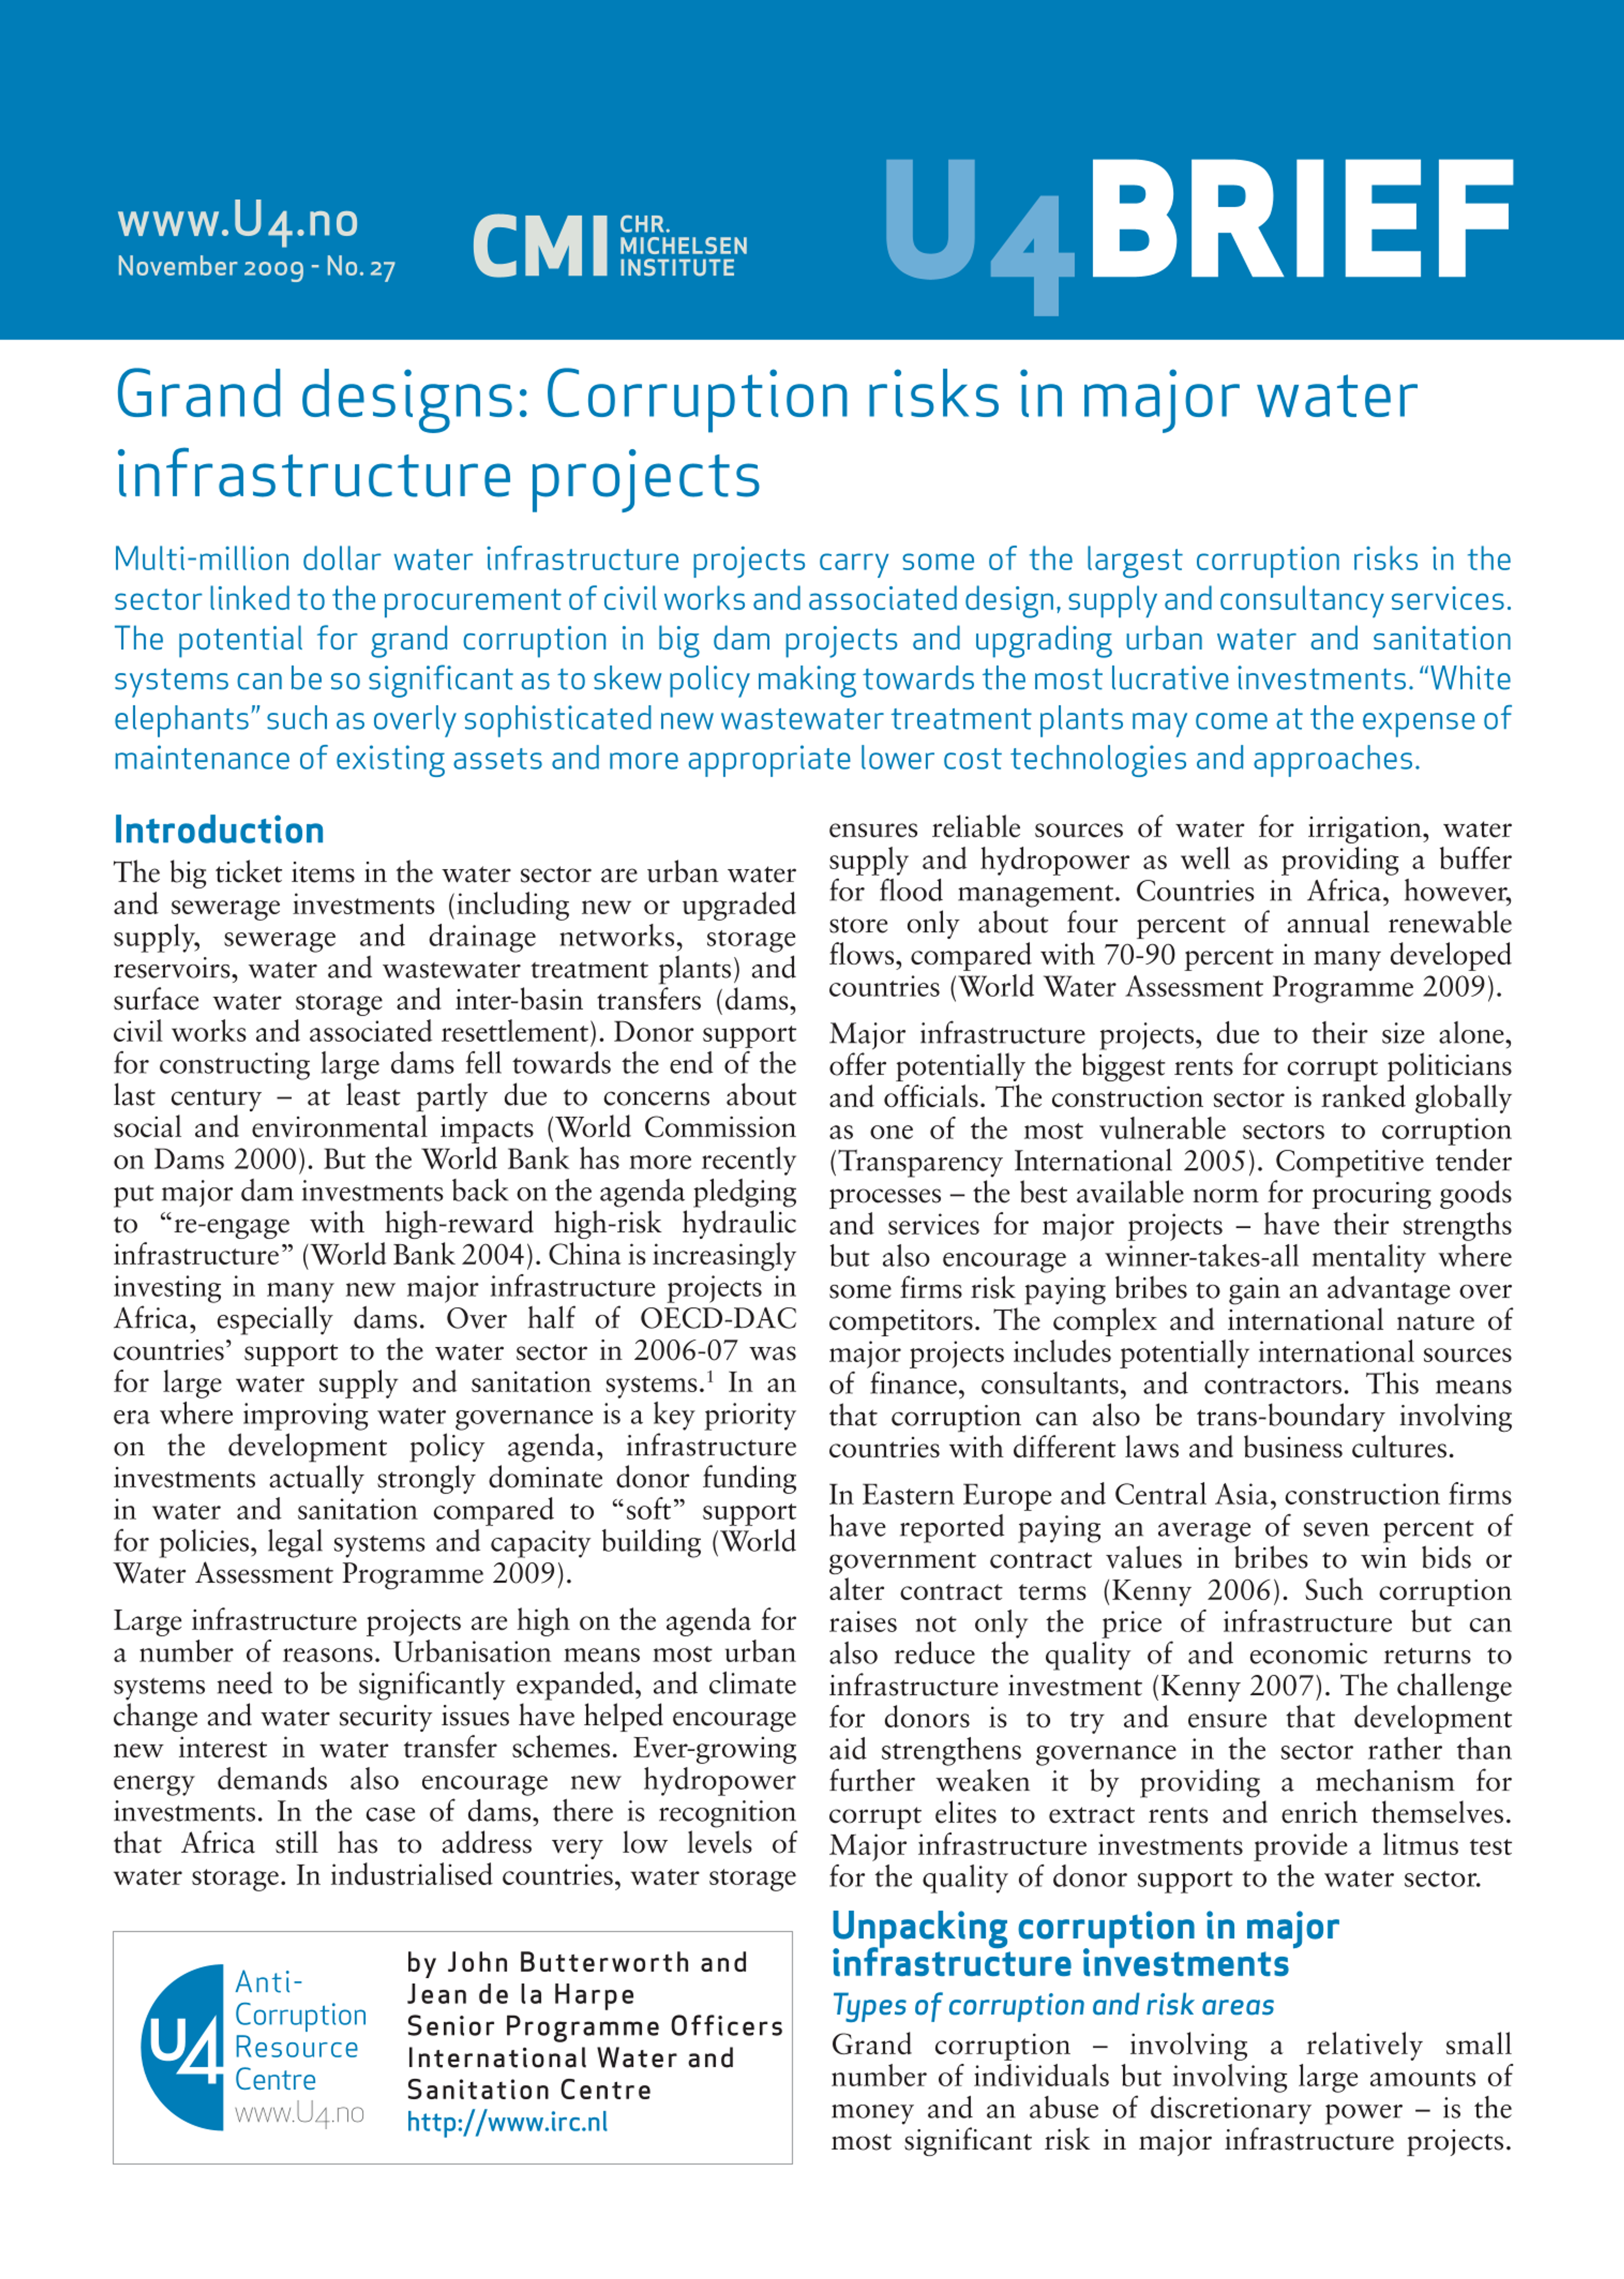 Grand designs: Corruption risks in major water infrastructure projects